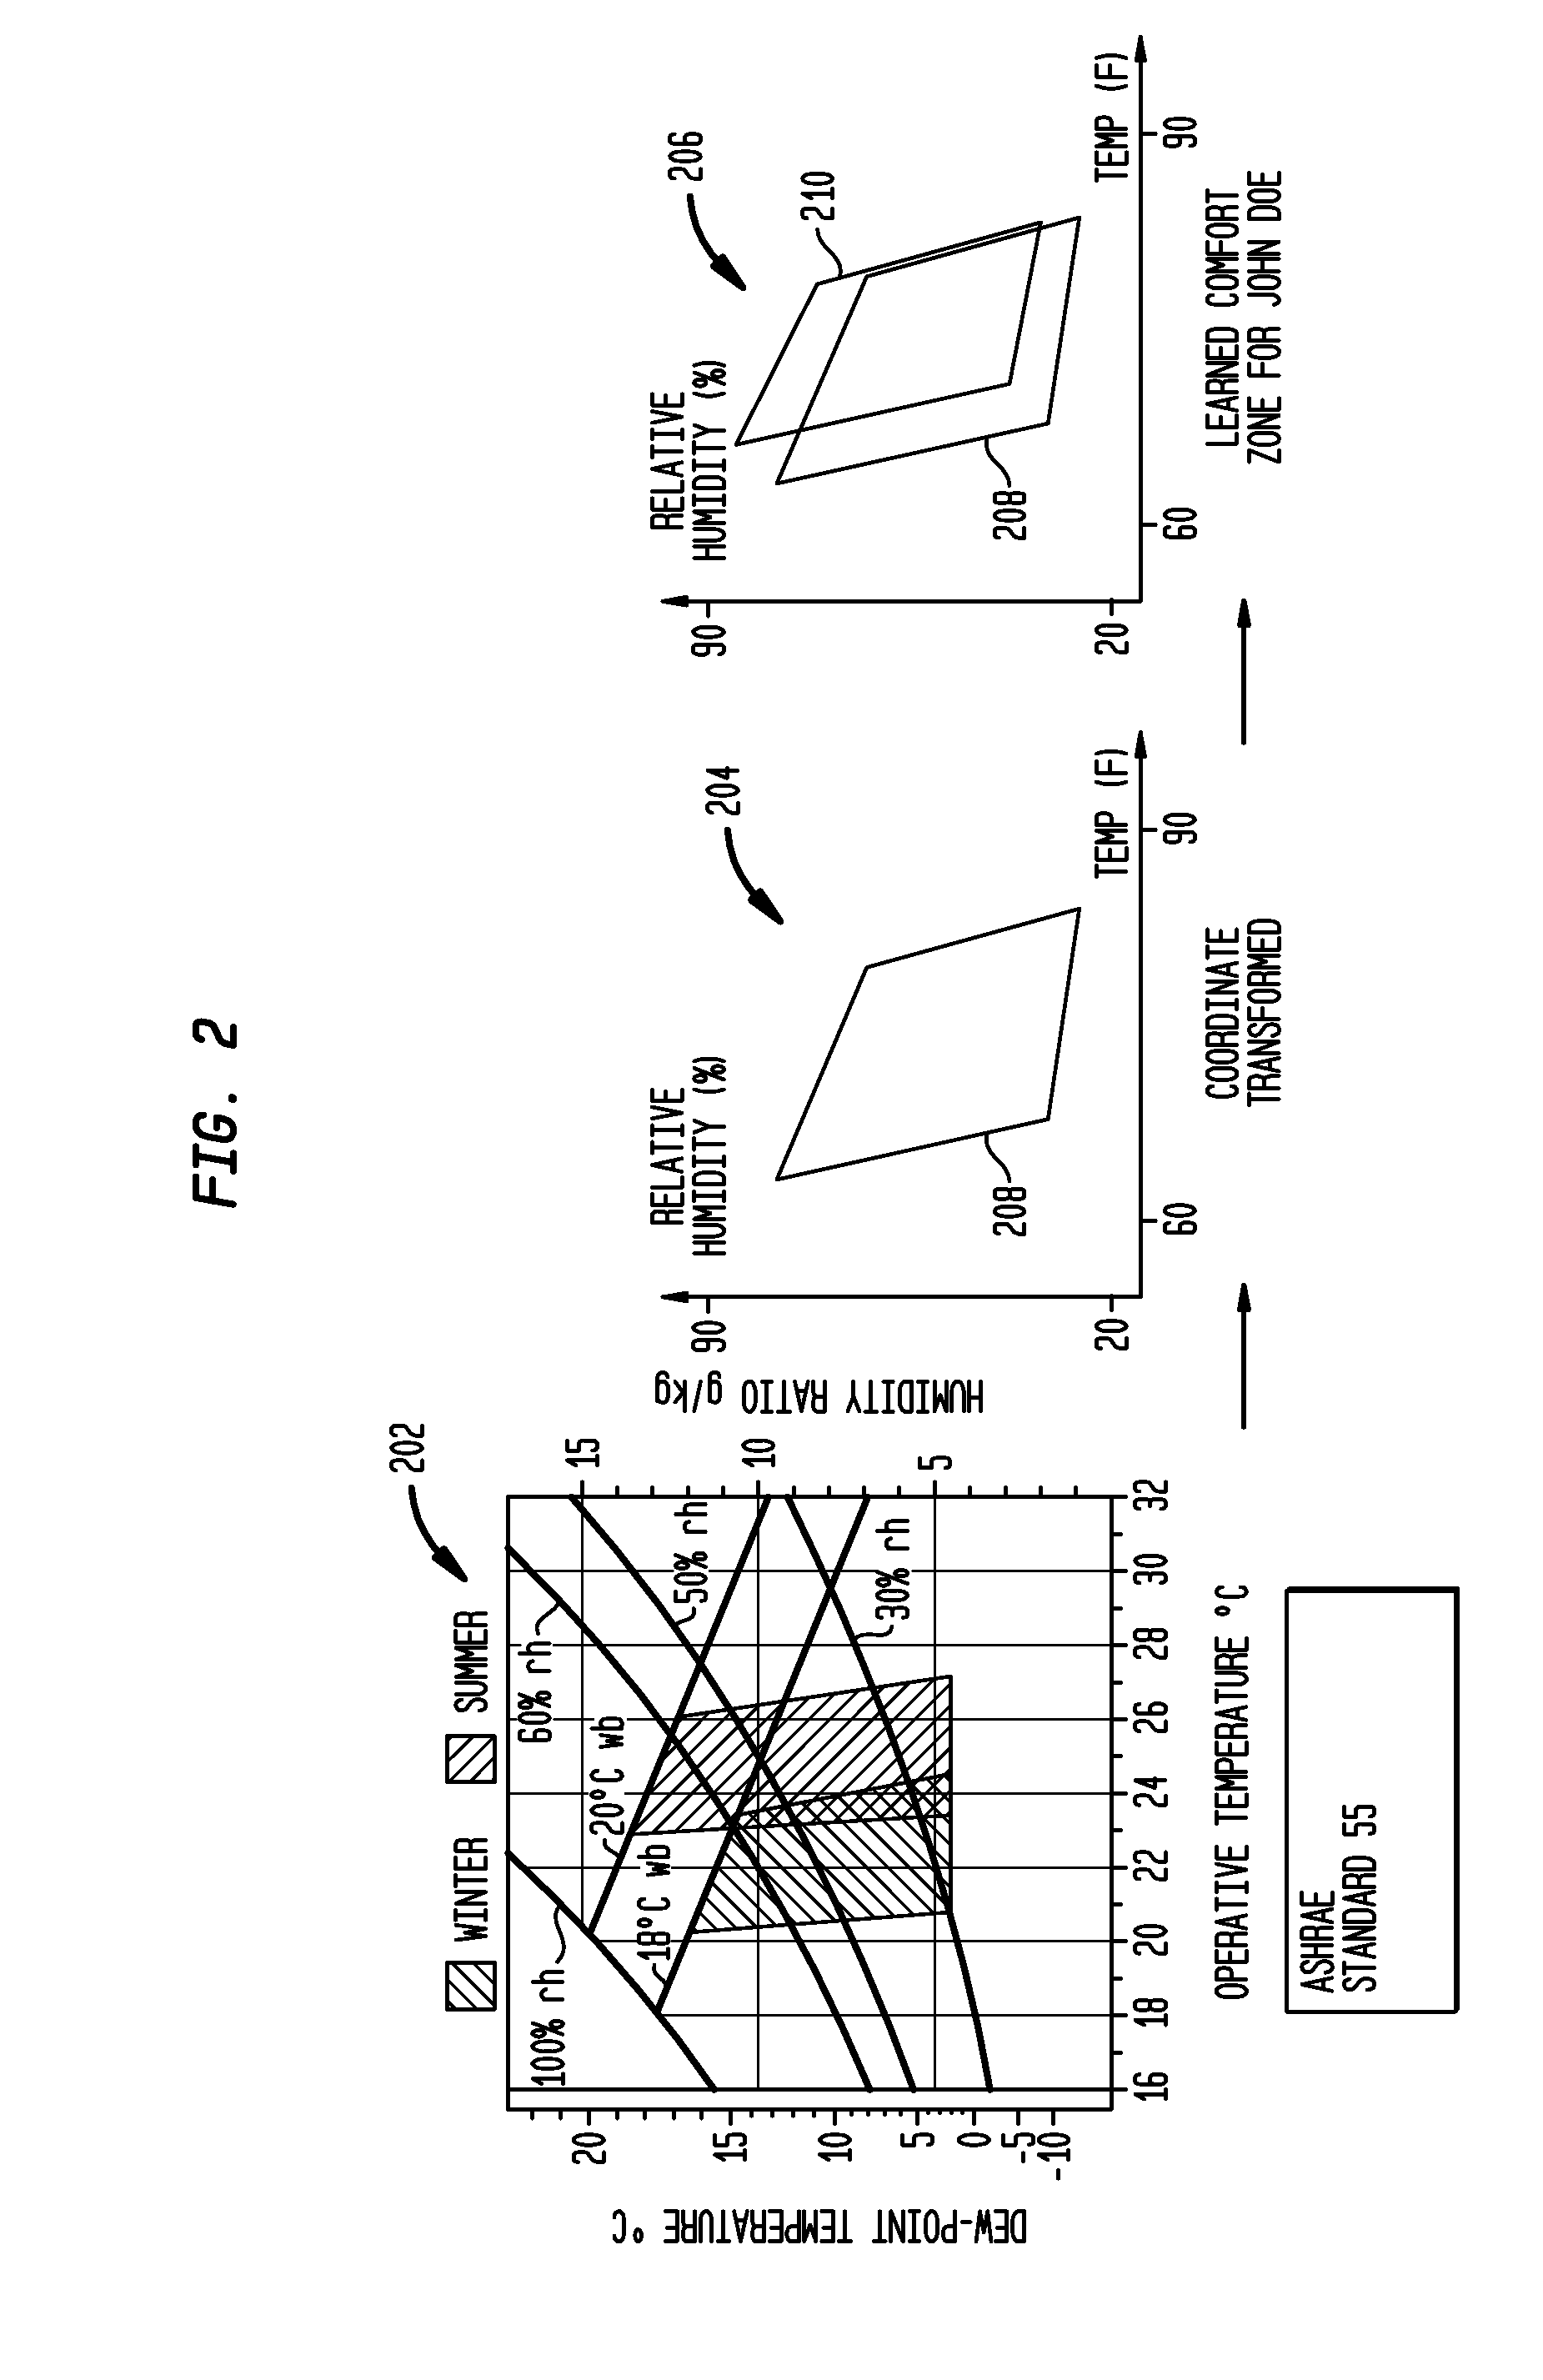 System and Method for Climate Control Set-Point Optimization Based On Individual Comfort